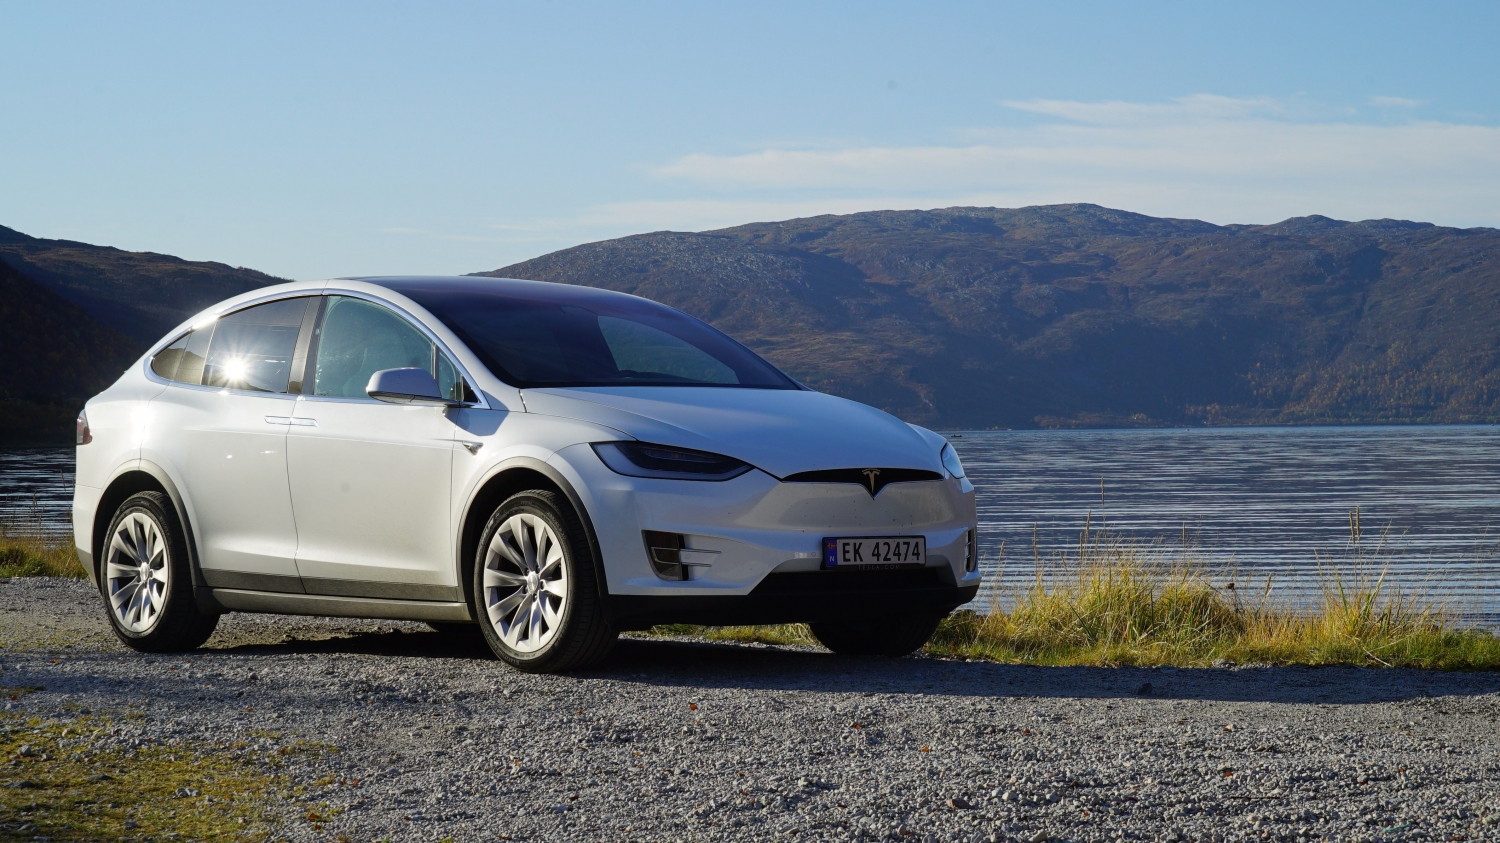 Three hours Arctic Fjord Sightseeing from Tromsø with our eco-friendly Tesla Model X